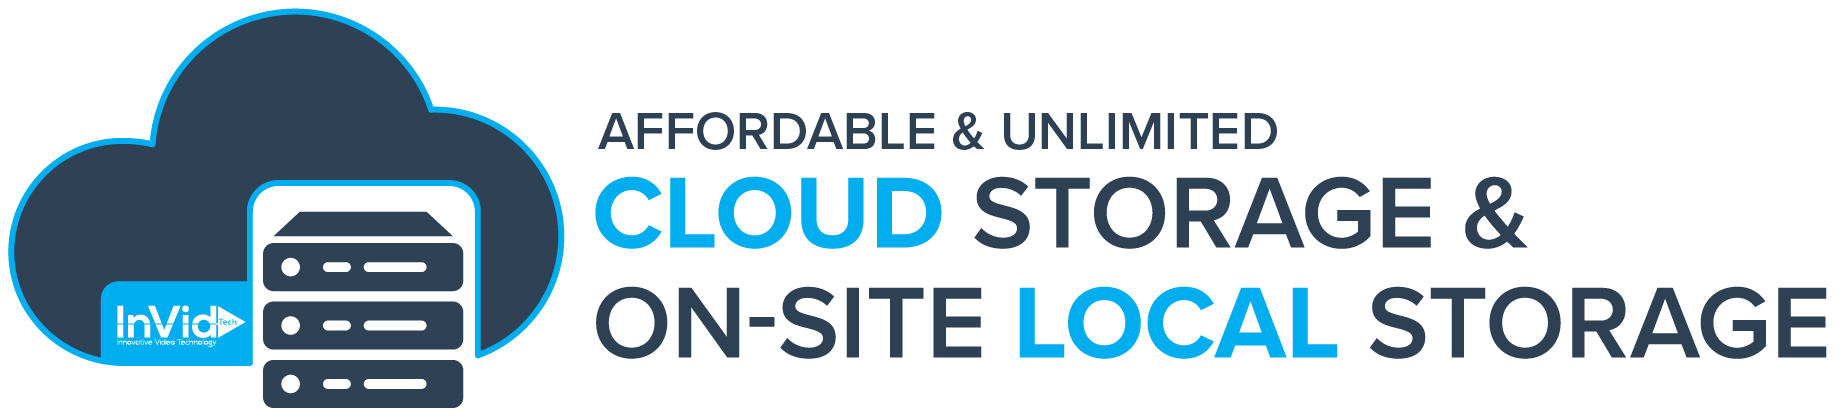 cloud_Affordable_unlimited